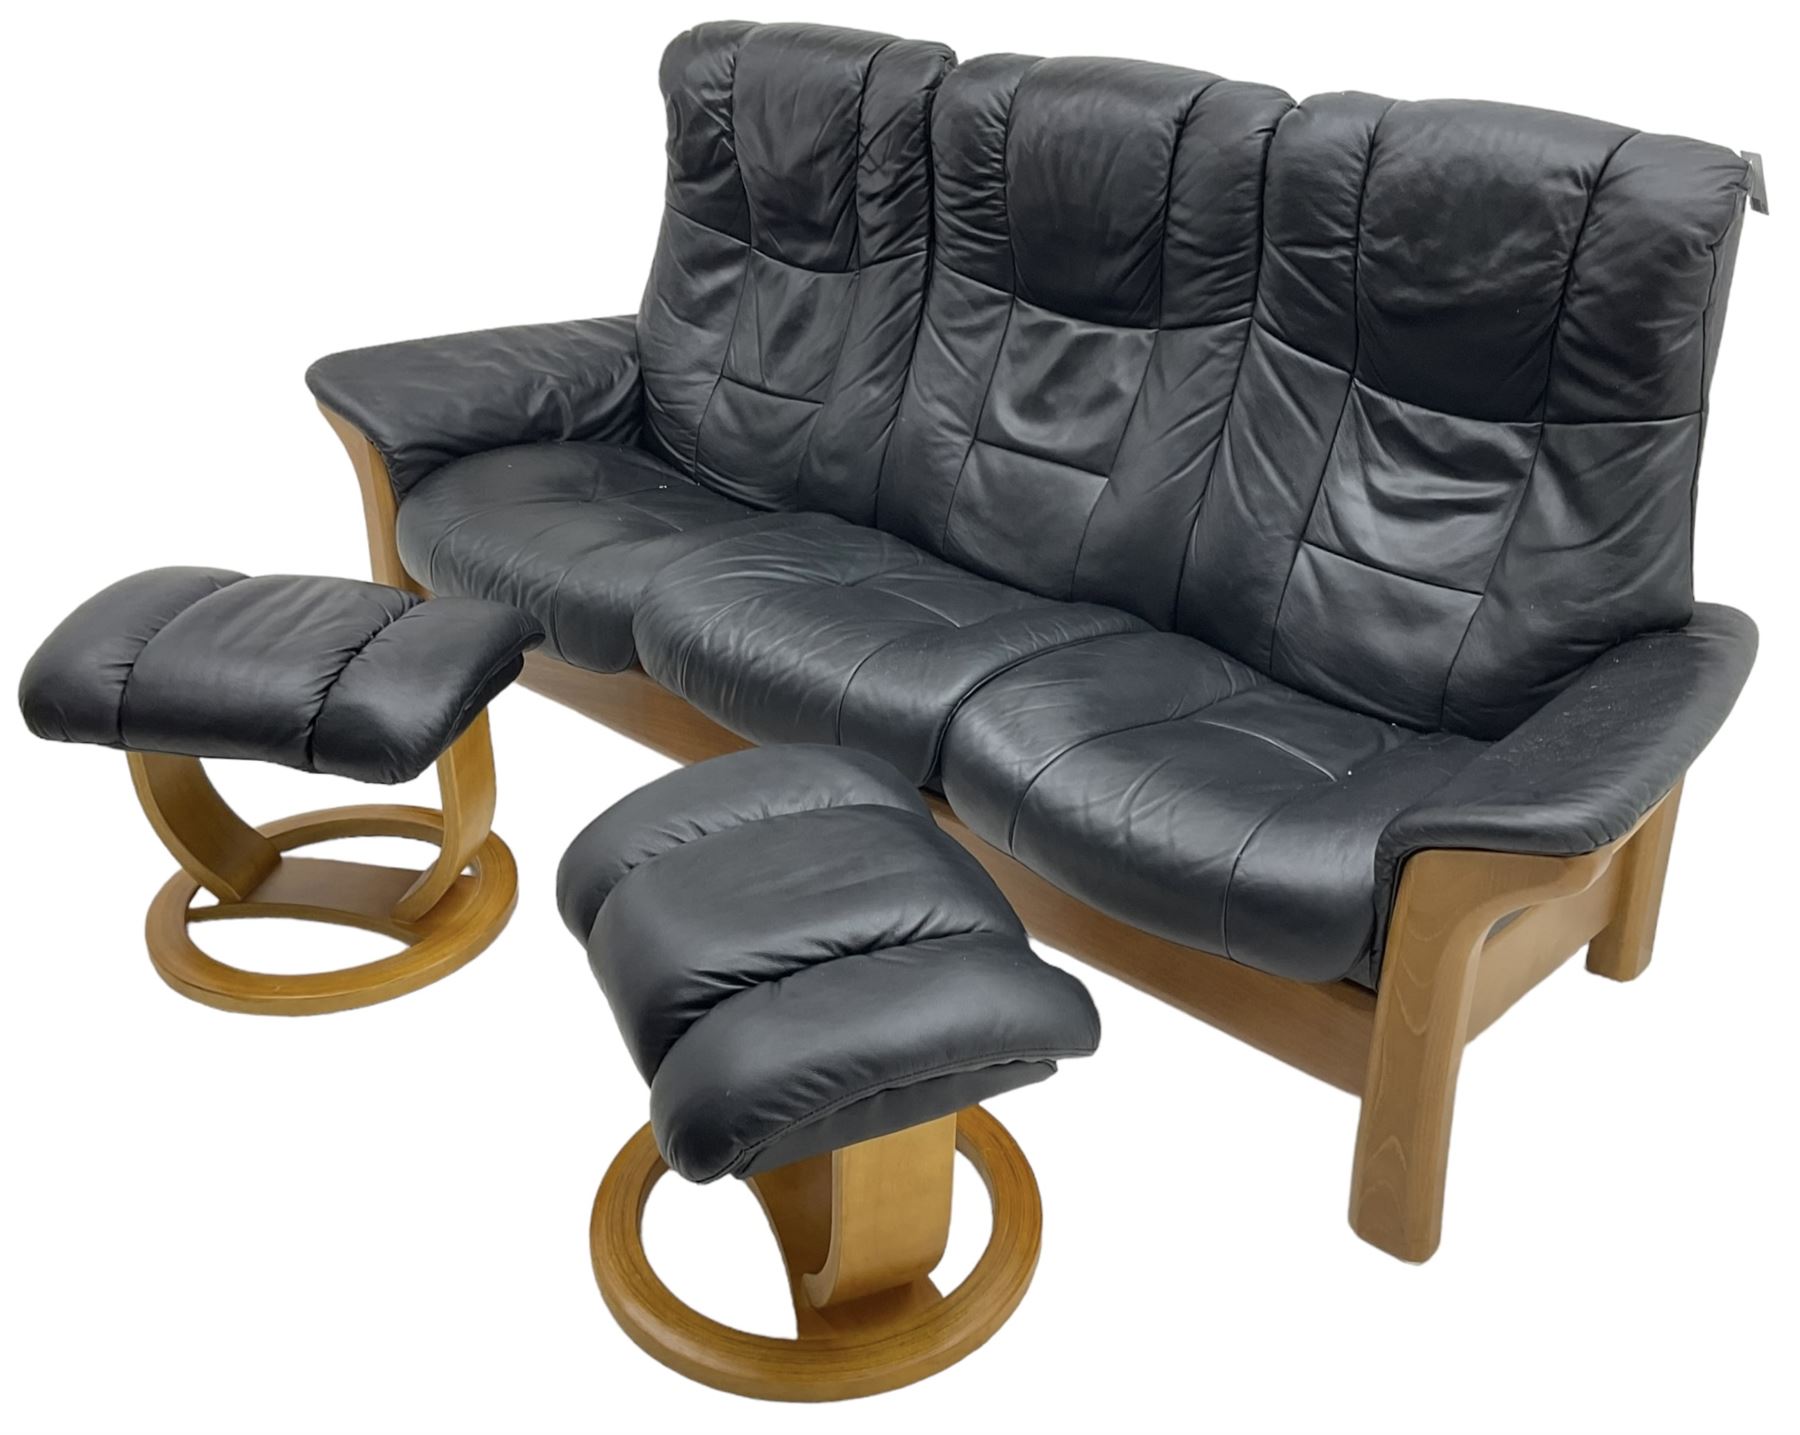 Stressless - 'Buckingham' three-seat settee upholstered in black leather; together with two associat